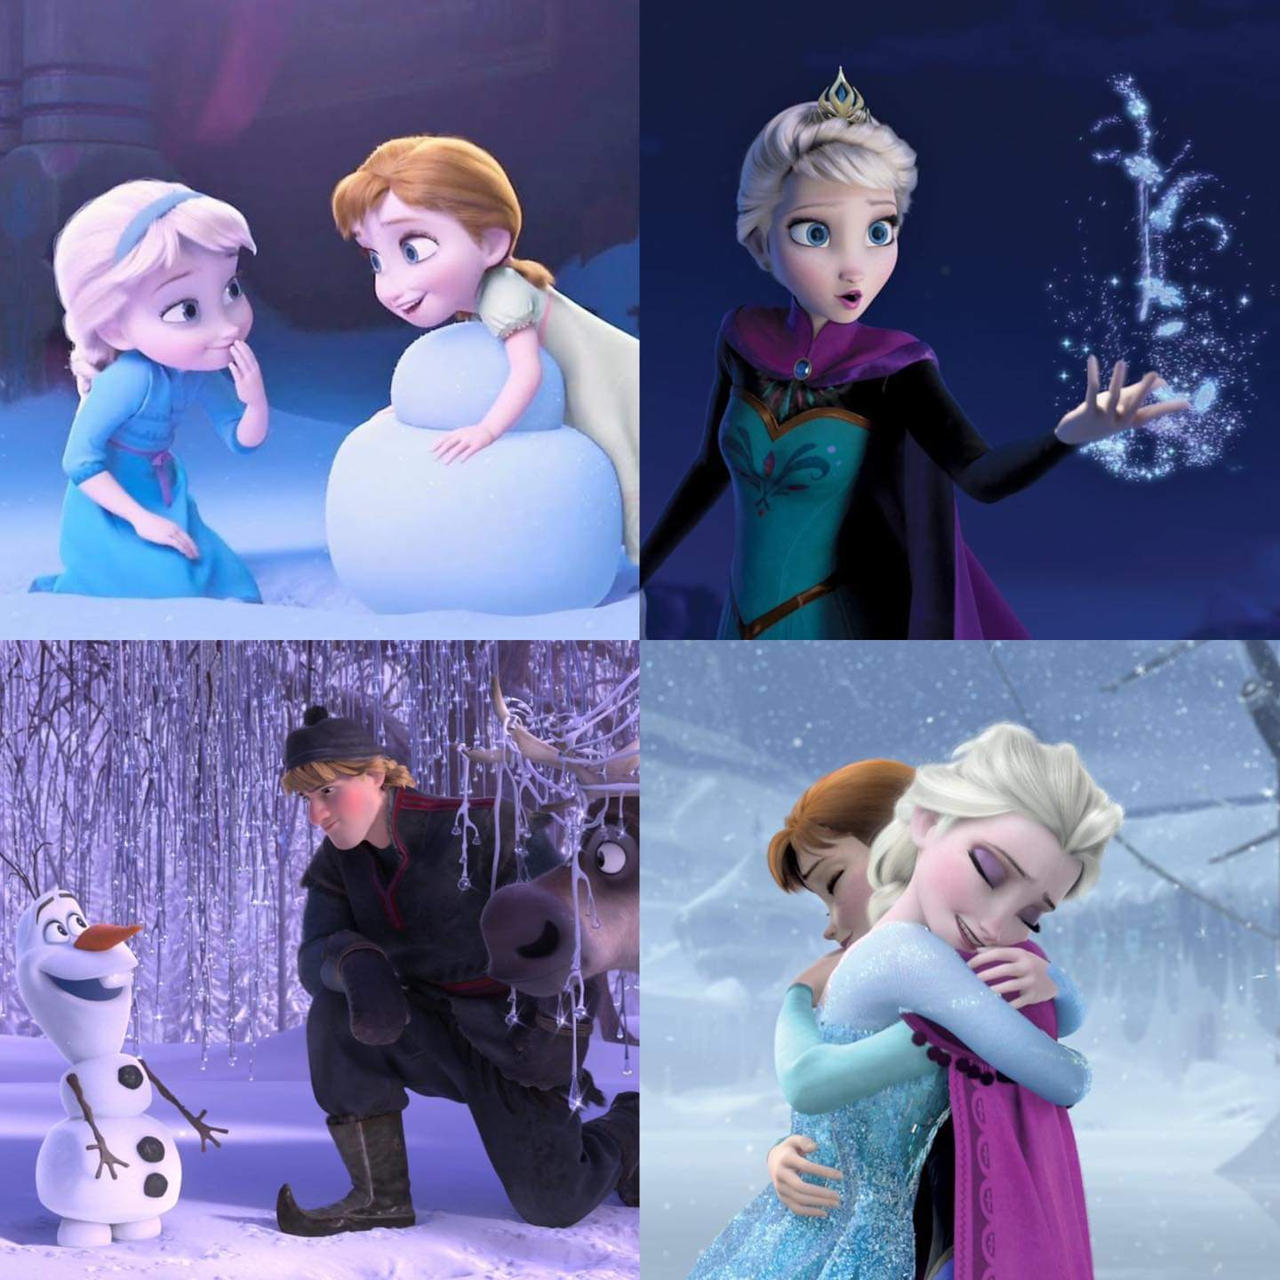 Frozen 3 more posters by aliciamartin851 on DeviantArt